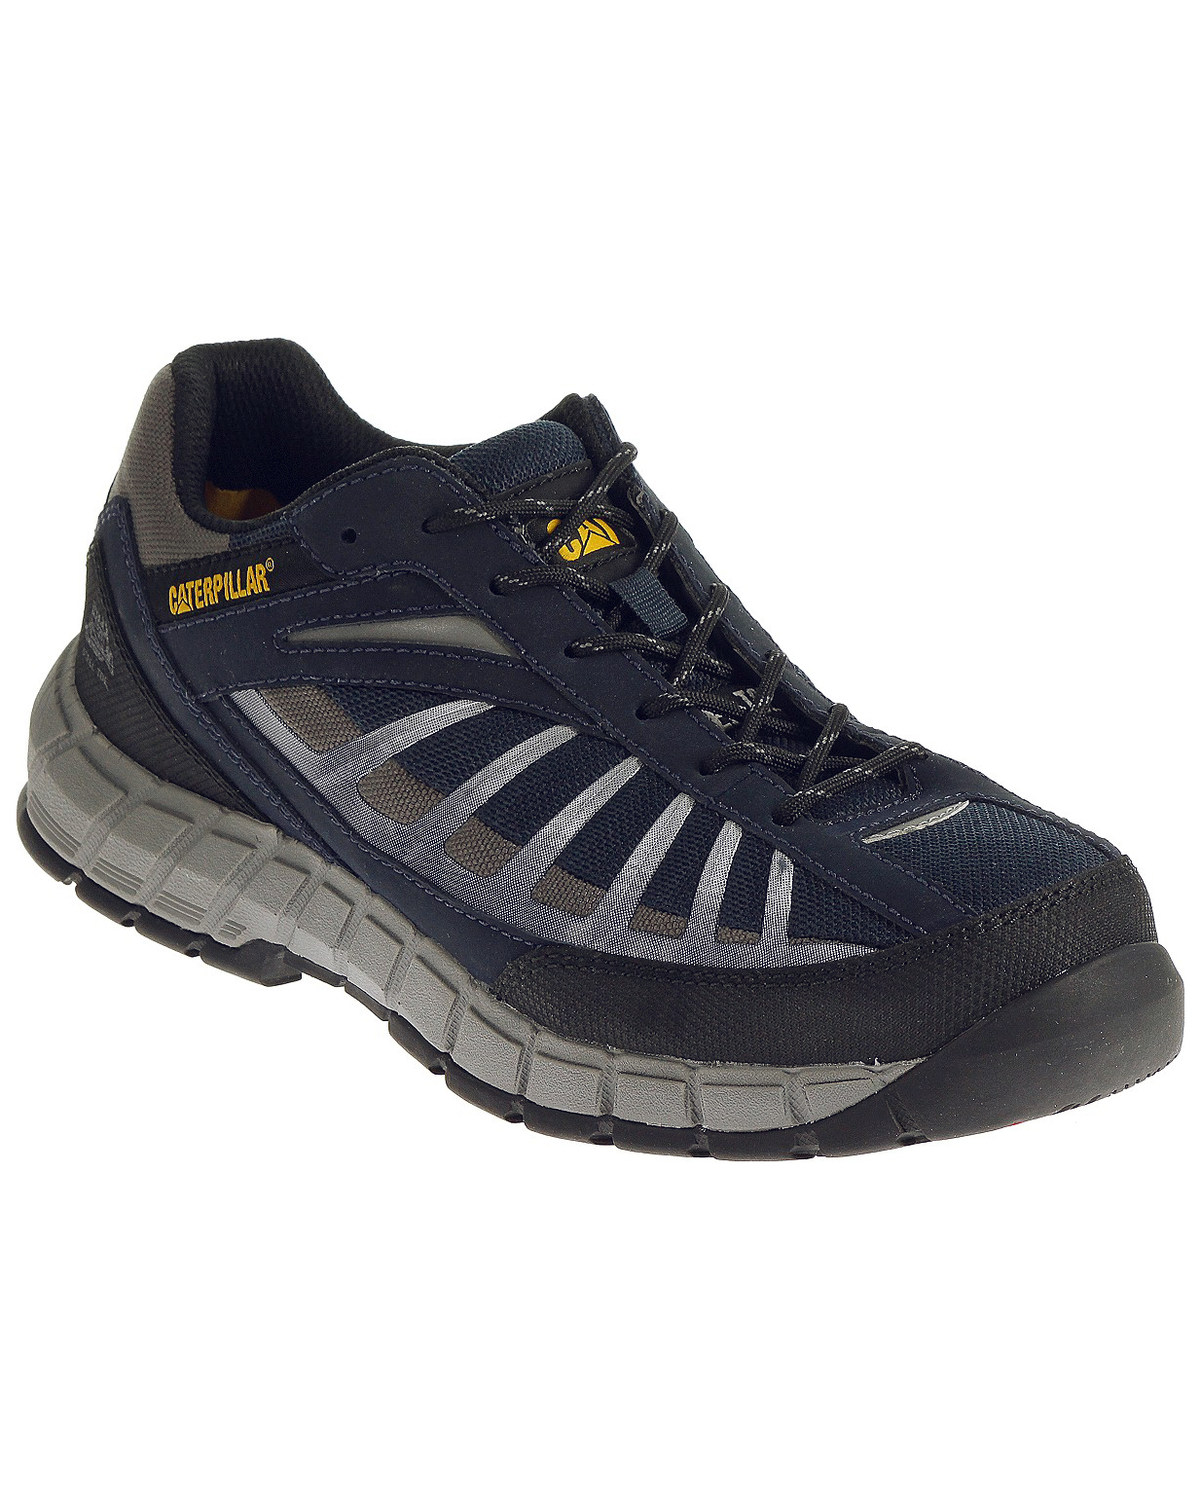 caterpillar slip on safety shoes